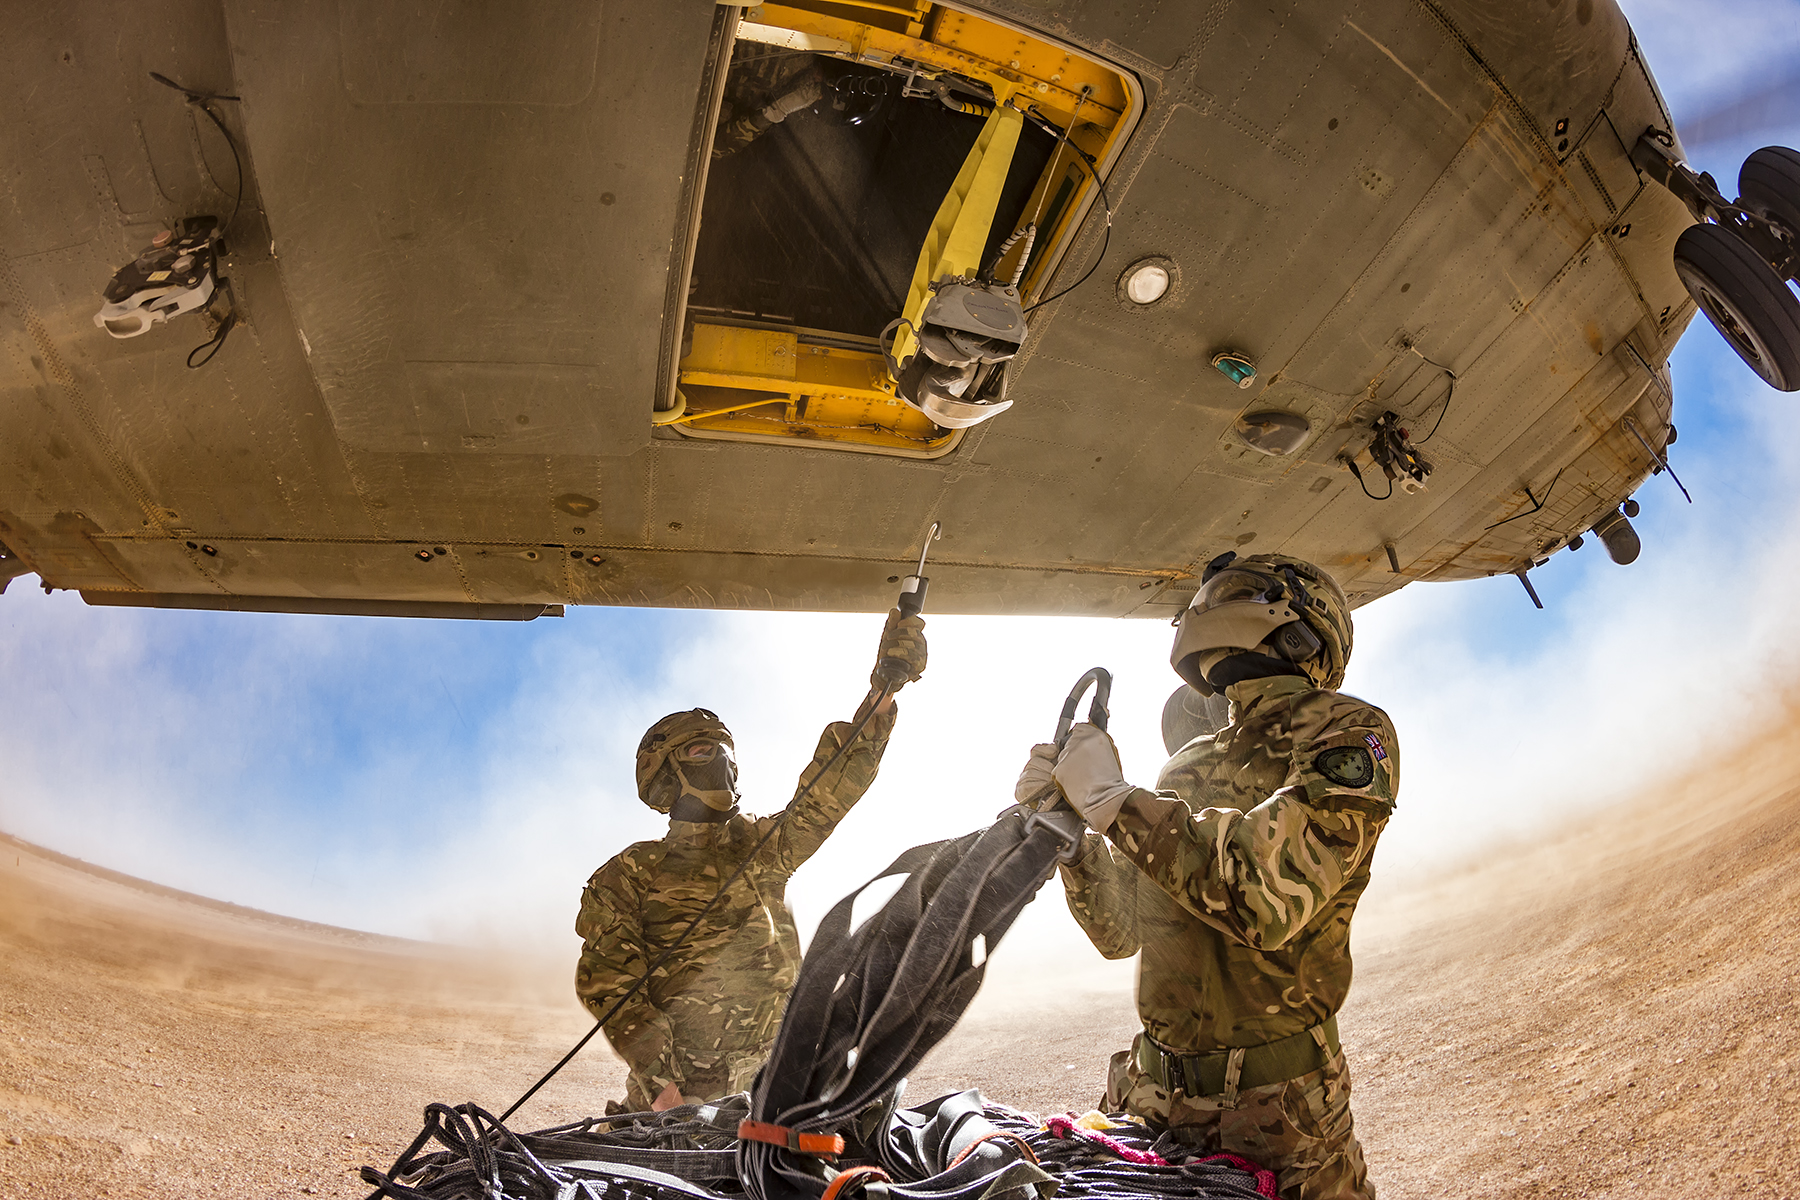 Image shows RAF Regiment hooking load to underslung cargo of helicopter.